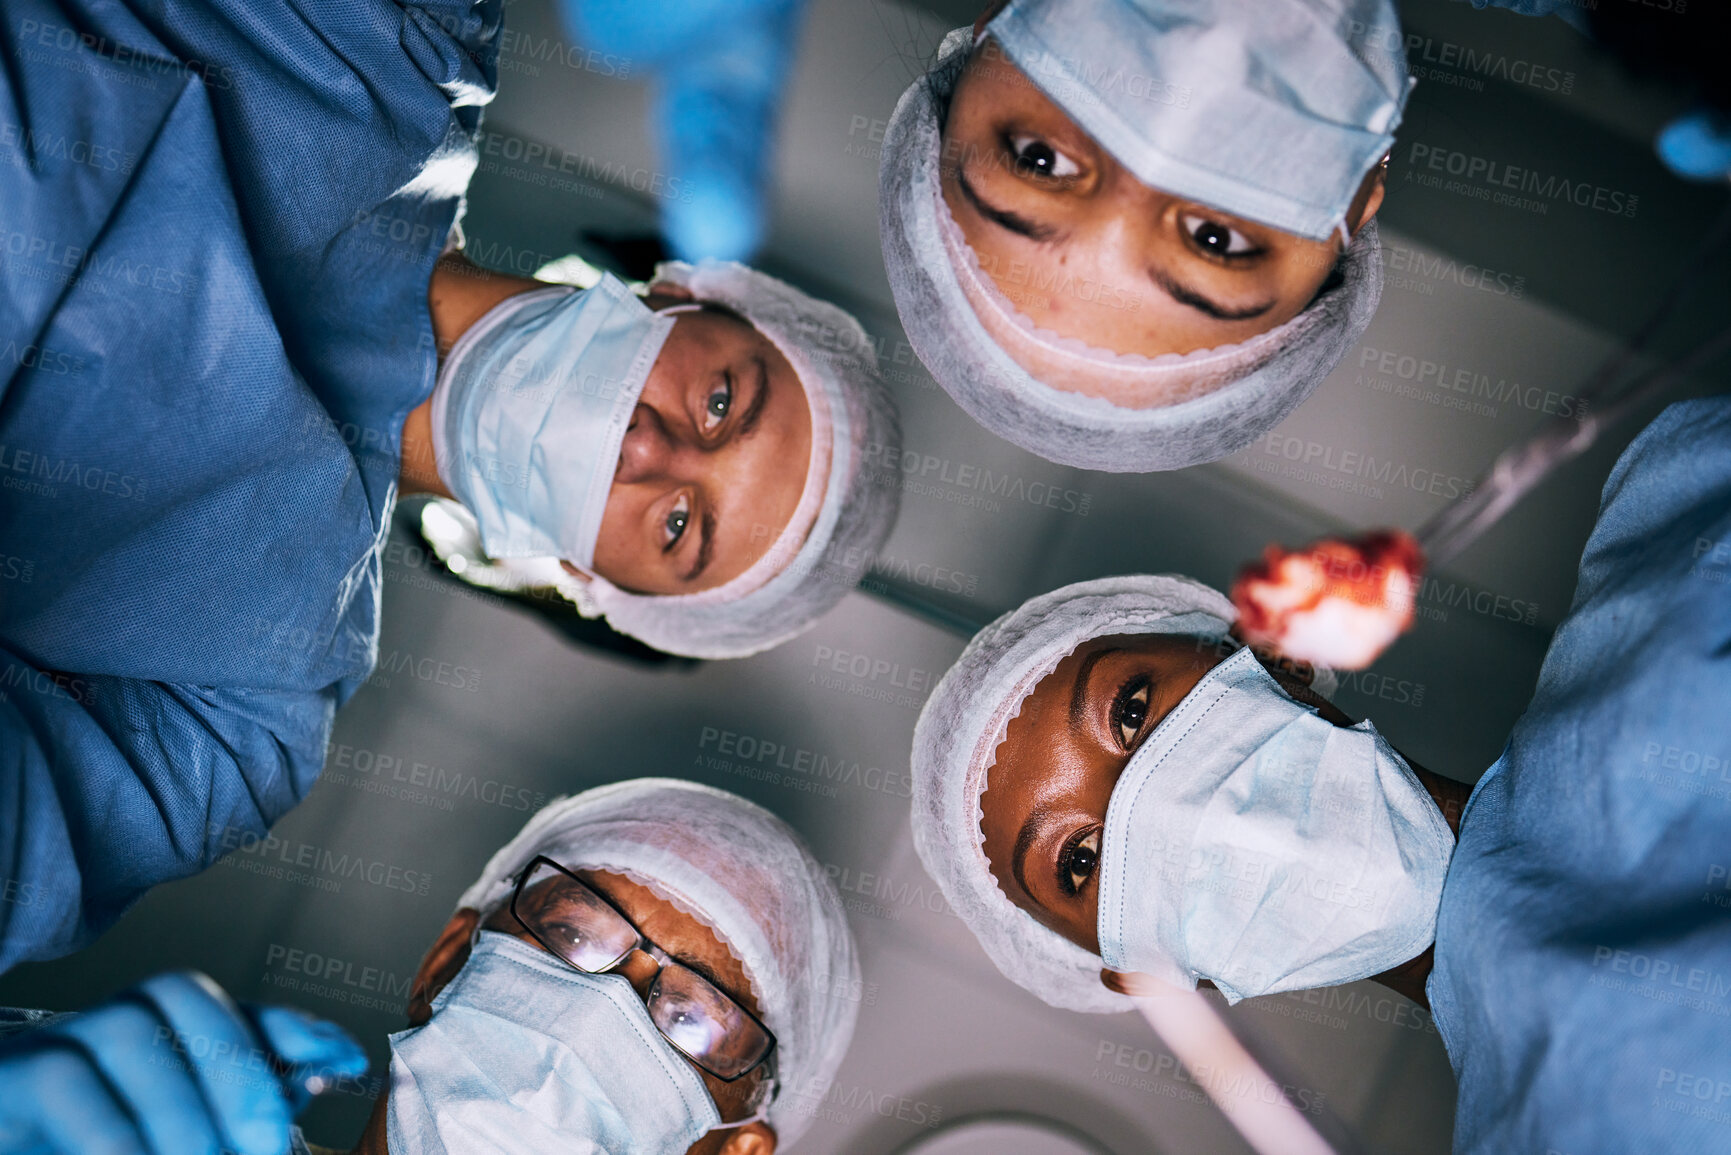 Buy stock photo Pov, surgery or doctors with mask, healthcare or treatment for injury, emergency or teamwork. Portrait, medical professional or staff with face cover, surgical or bottom view of coworkers in hospital